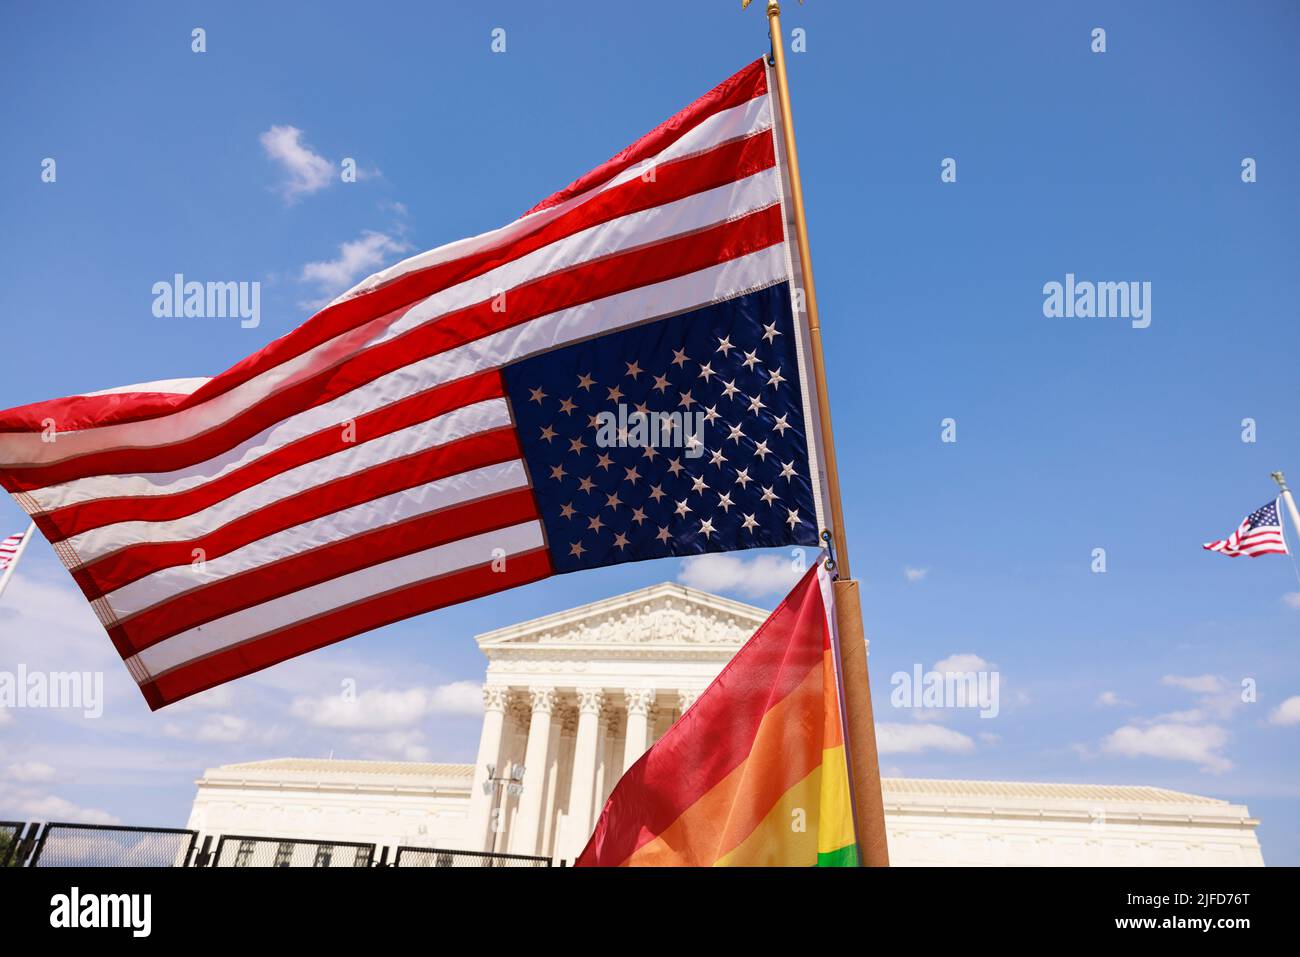 Washington, United States. 26th June, 2022. An American flag flies upside down next to a Pride flag outside the Supreme Court during a two day protest. More than 100 demonstrators gathered outside the Supreme Court of United States for an abortion rights rally. The rally comes one week after the Supreme Court of the United States issued its opinion in Dobbs v. Jackson Women's Health Organization which overturned Roe v. Wade and the right to abortion access. (Photo by Jeremy Hogan/SOPA Images/Sipa USA) Credit: Sipa USA/Alamy Live News Stock Photo